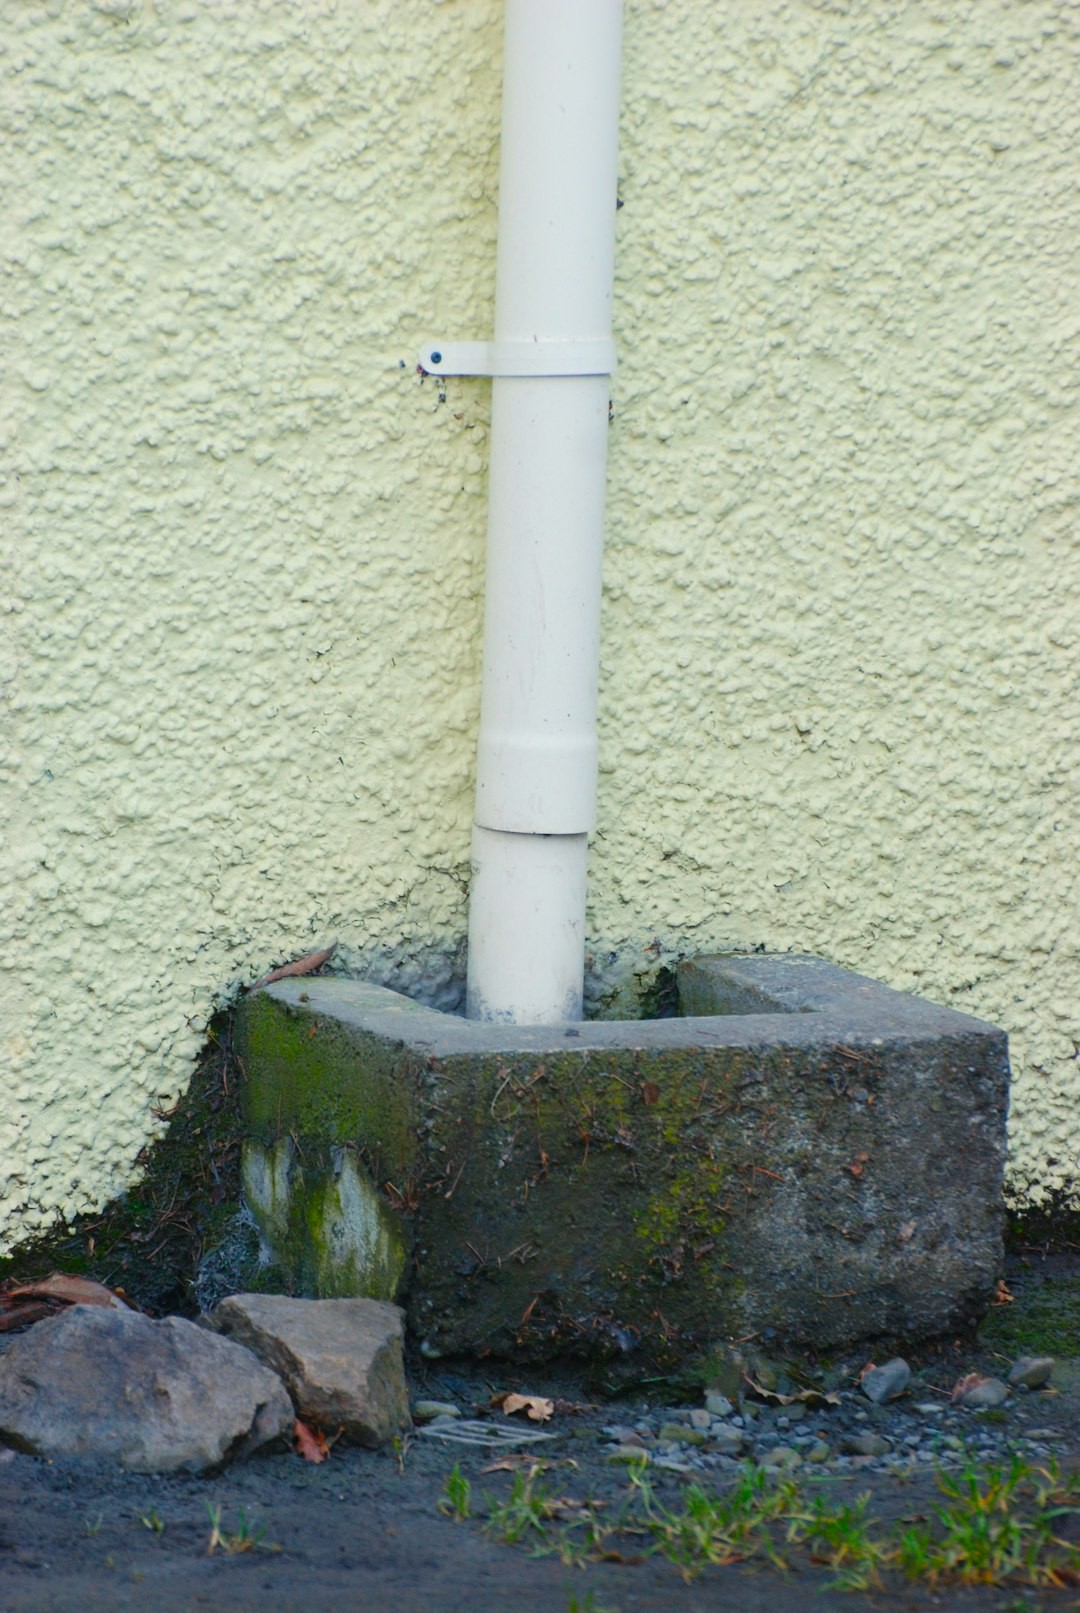 If you use my photos please consider "buying me a coffee!" as a thankyou :p https://www.buymeacoffee.com/KerinGedge Queen Mary Hospital, Hanmer Springs, South Island. A downpipe going into an old drain